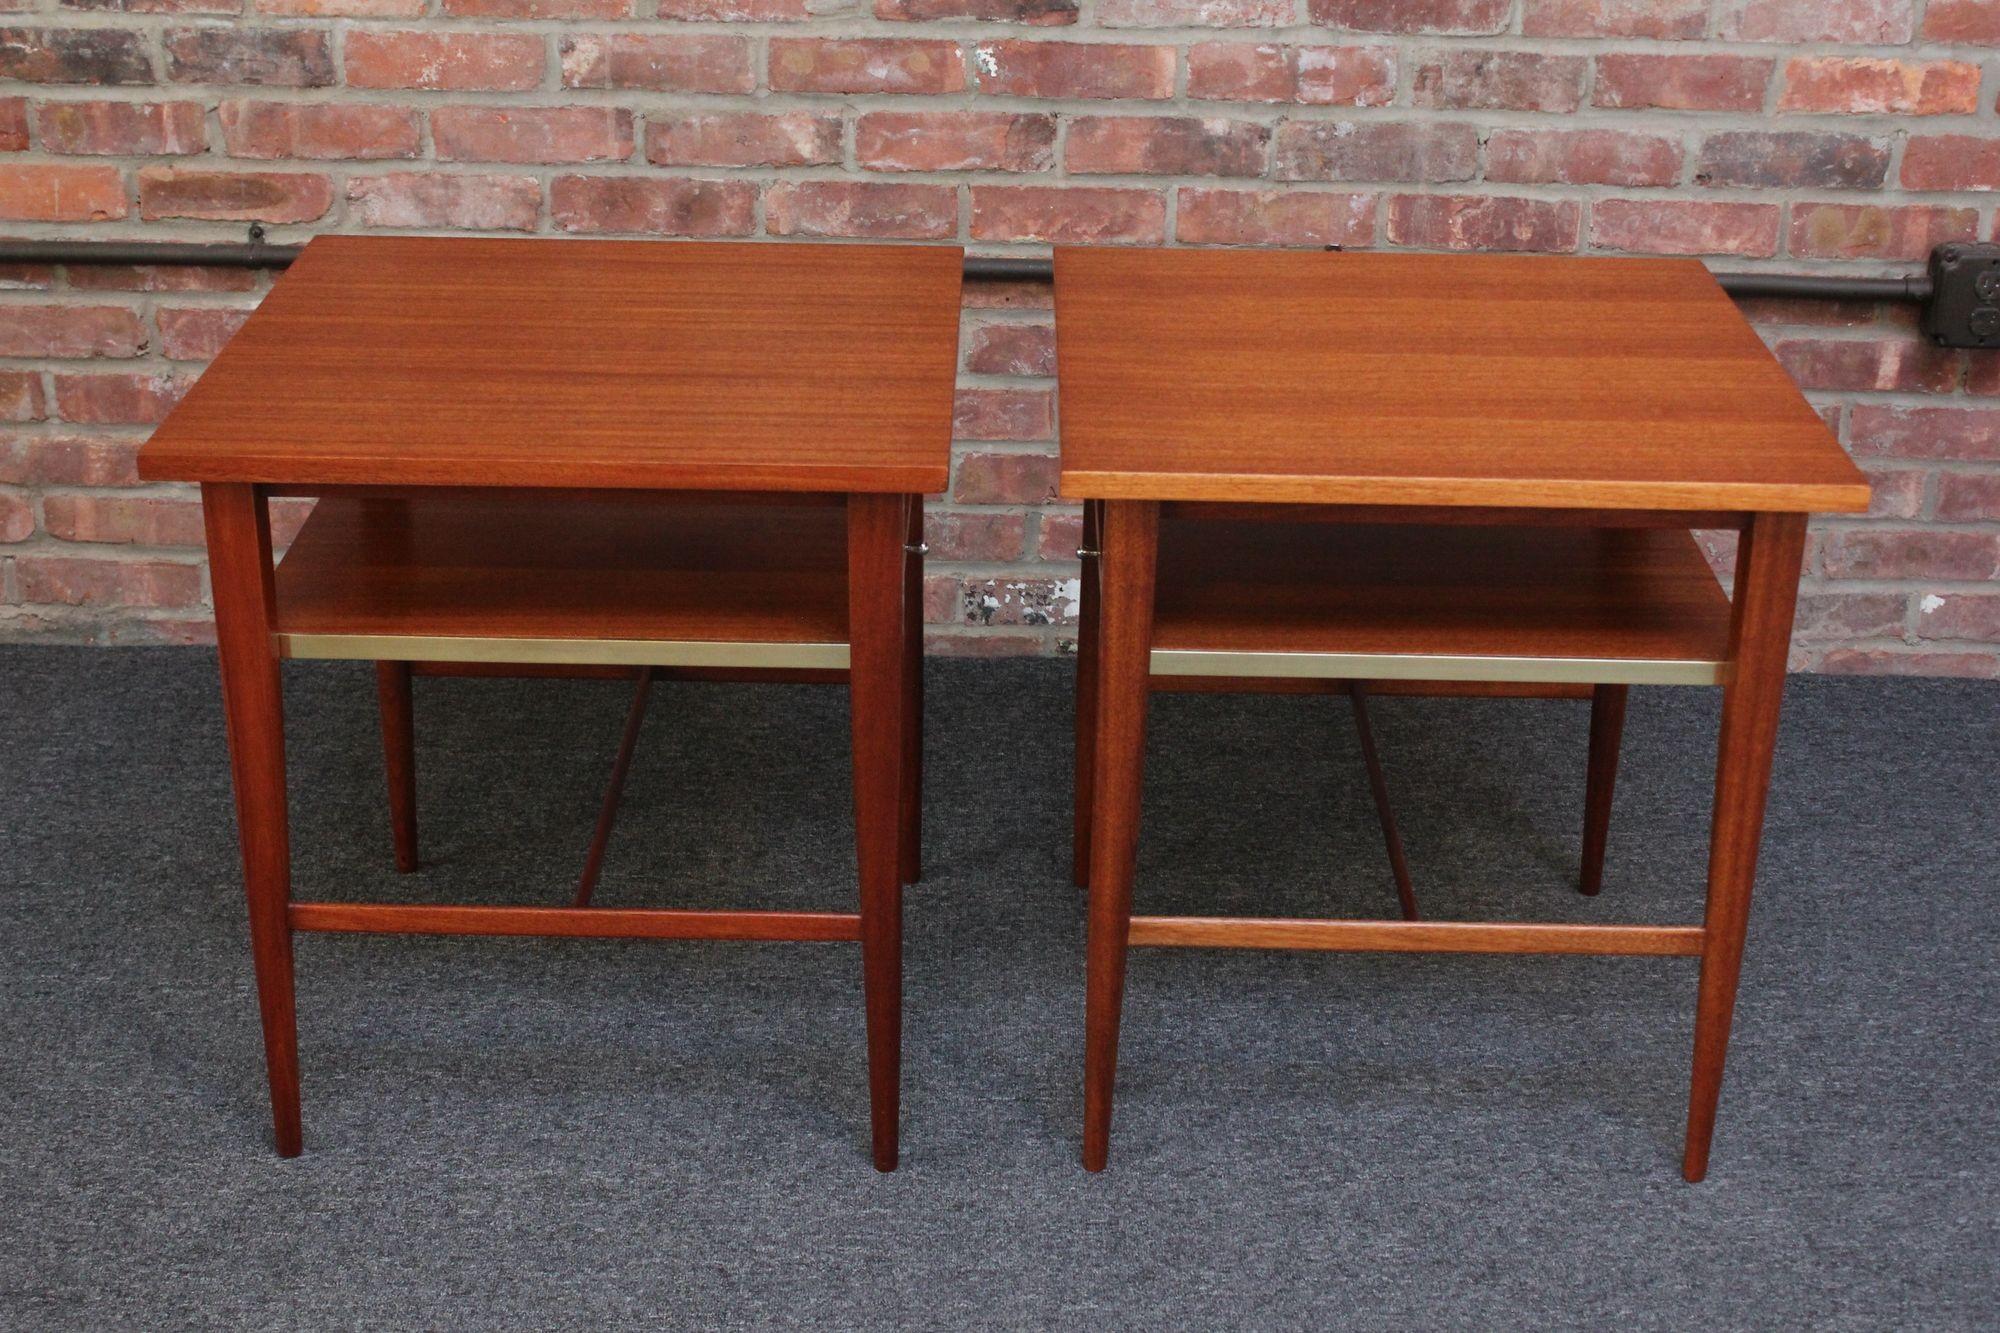 Pair of Paul Mccobb Calvin Group Mahogany and Brass Nightstands for Directional In Good Condition For Sale In Brooklyn, NY